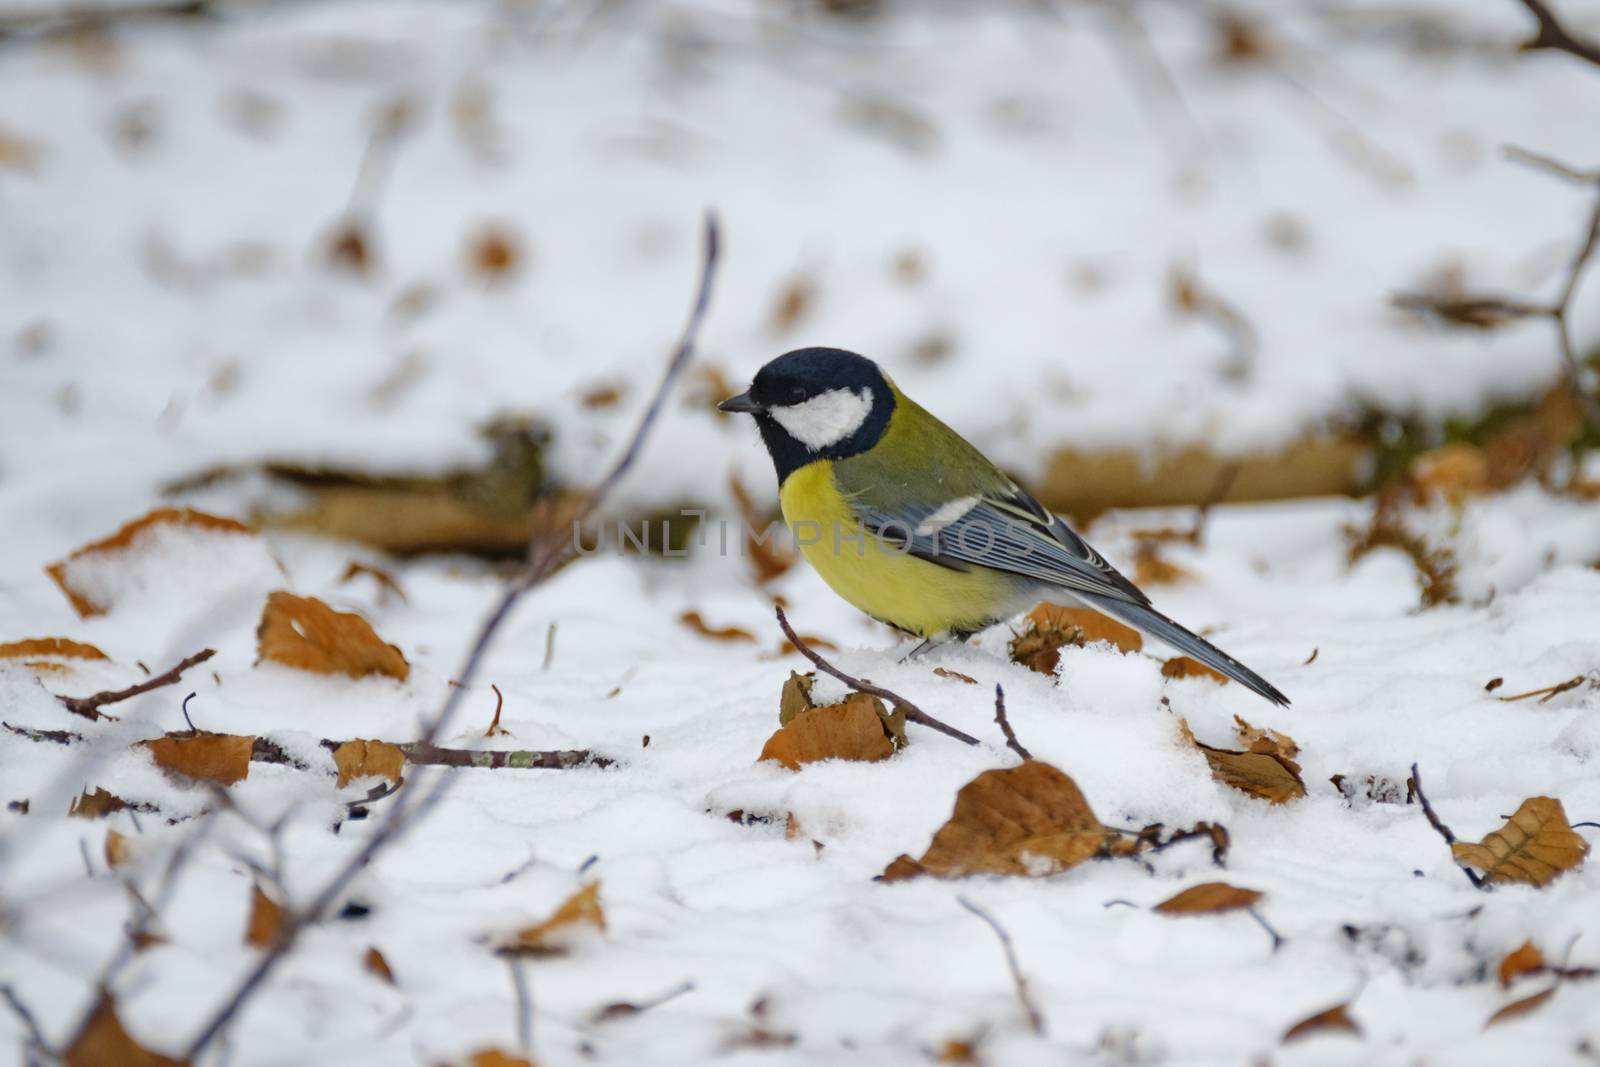 A Great tit (Parus major) tries to find anything eatable in the snow during a cold winter-day